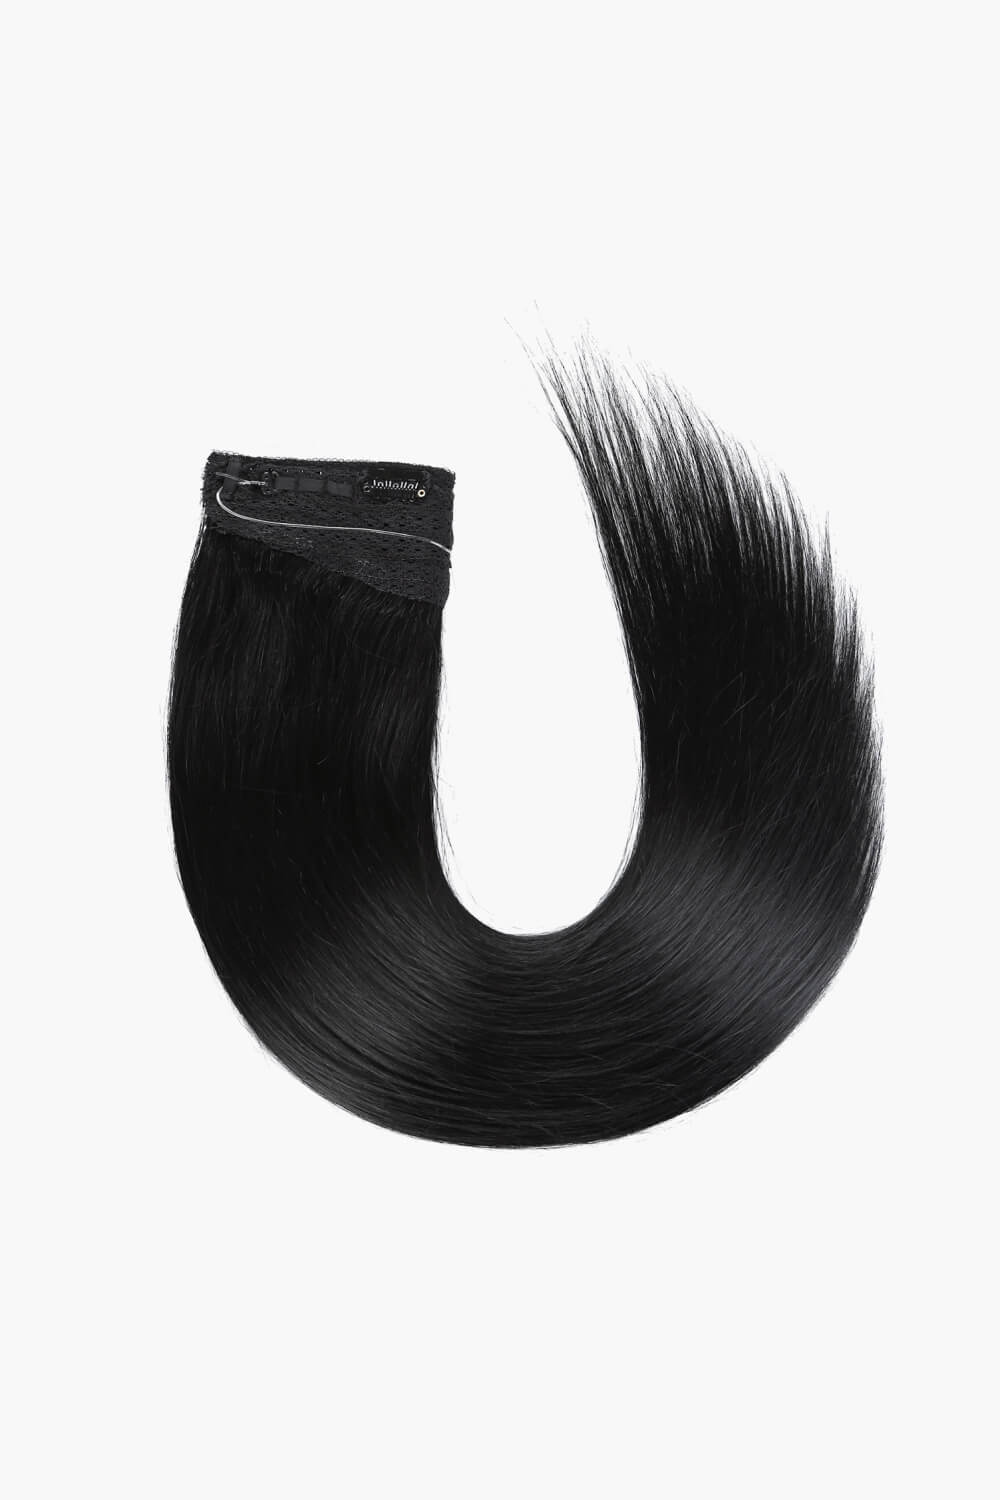 18" 80g Indian Human Halo Hair - Uylee's Boutique